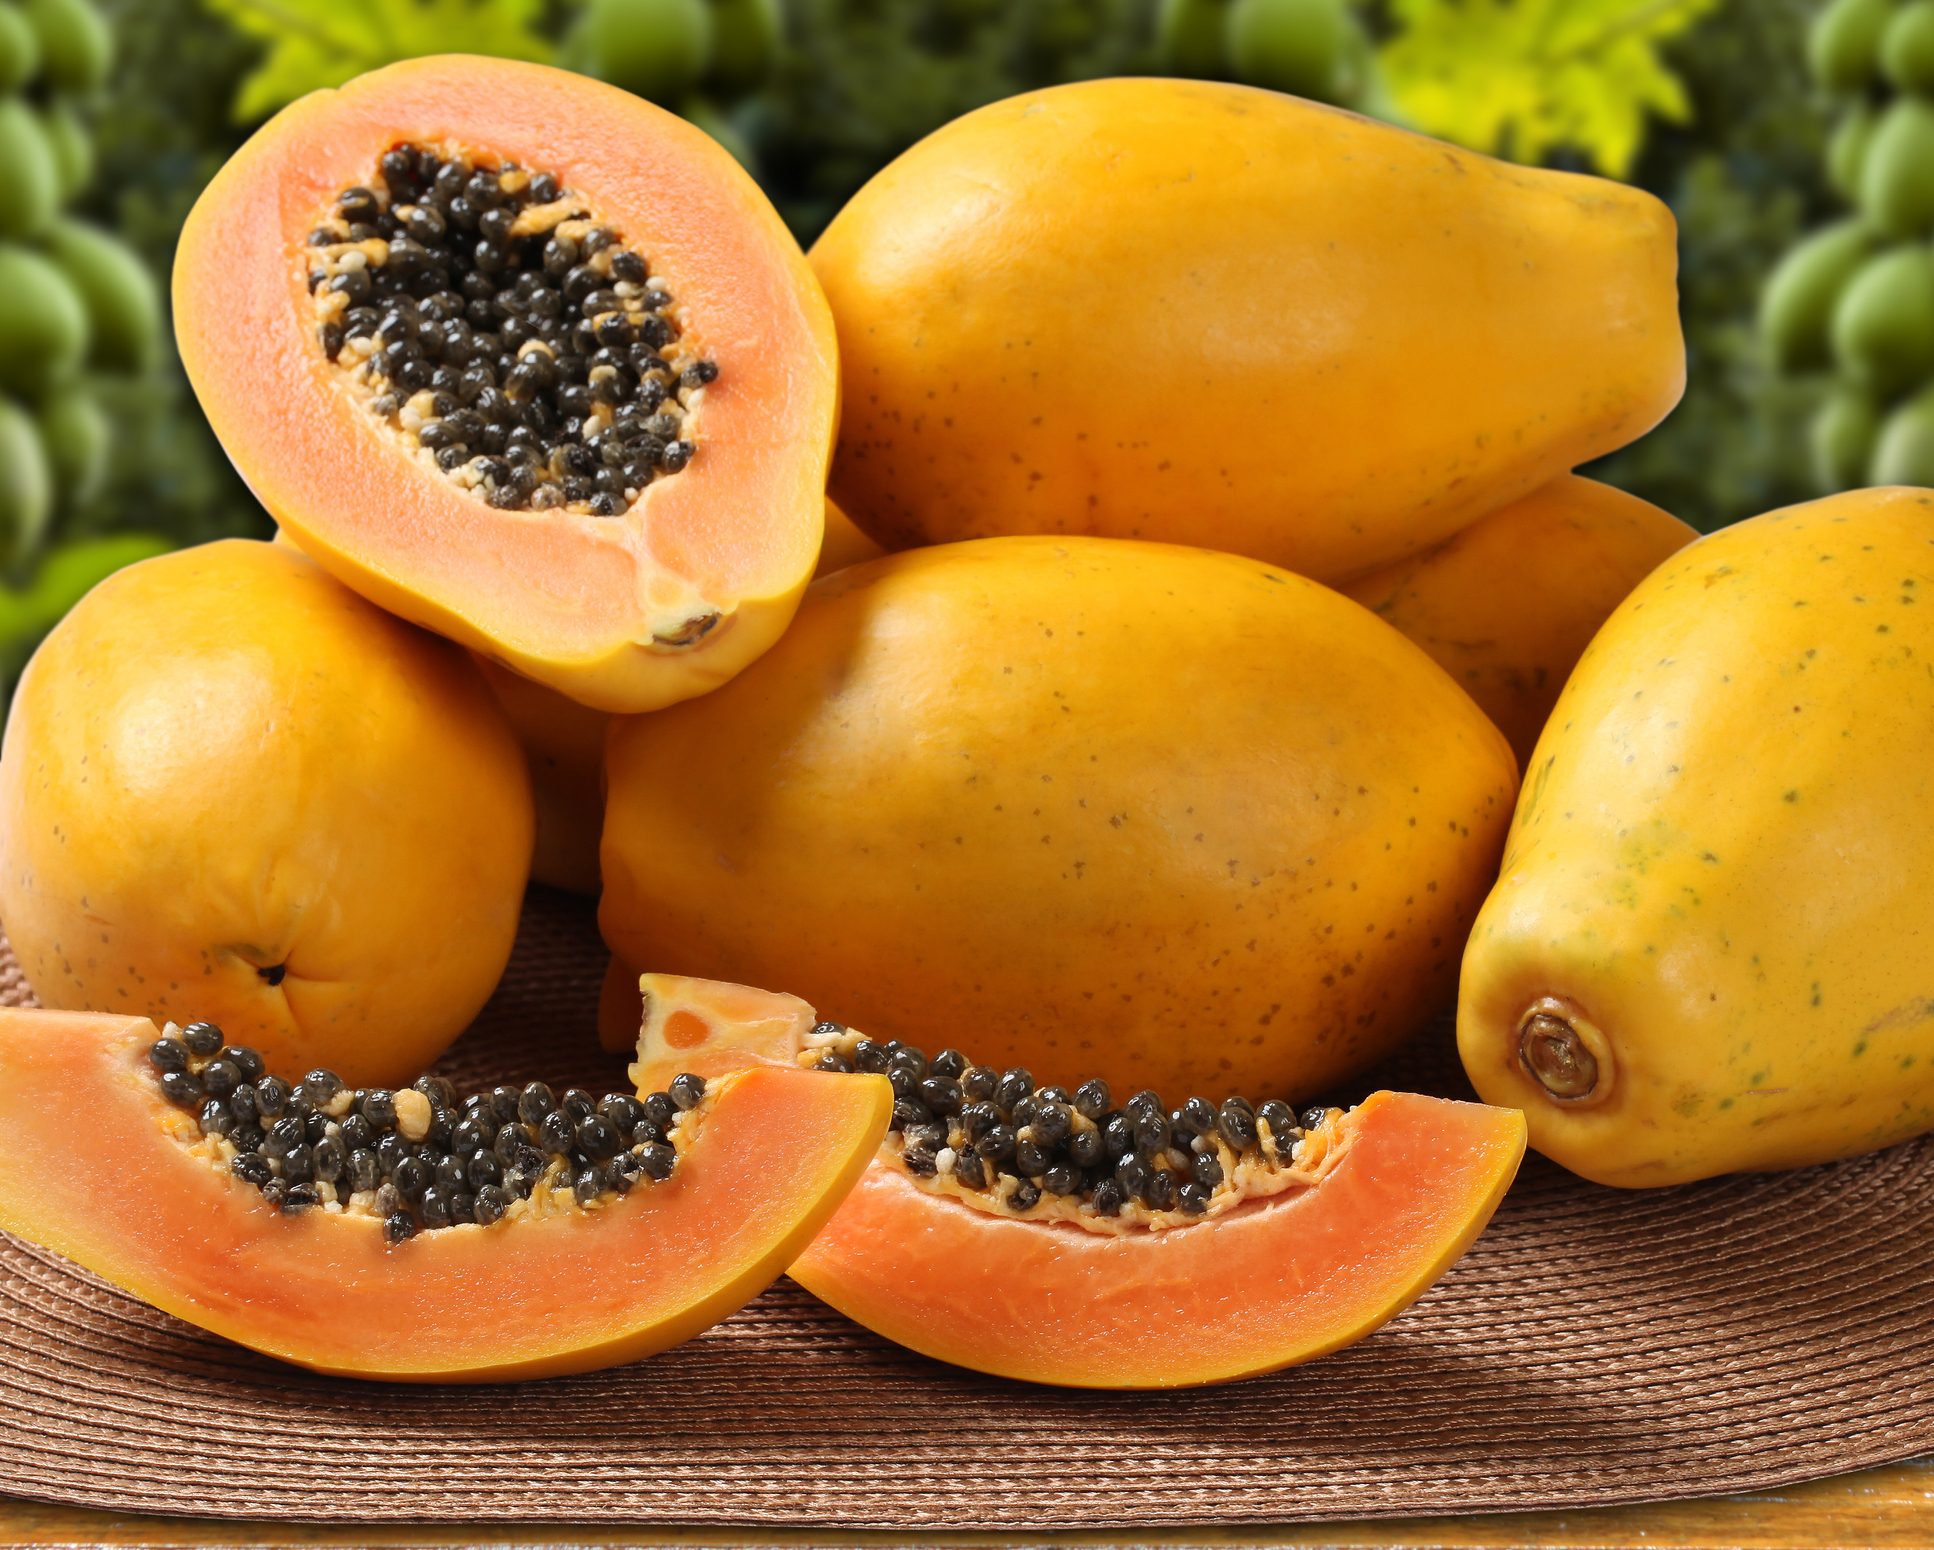 Can we get Healthy Skin And Hair With Papayas?